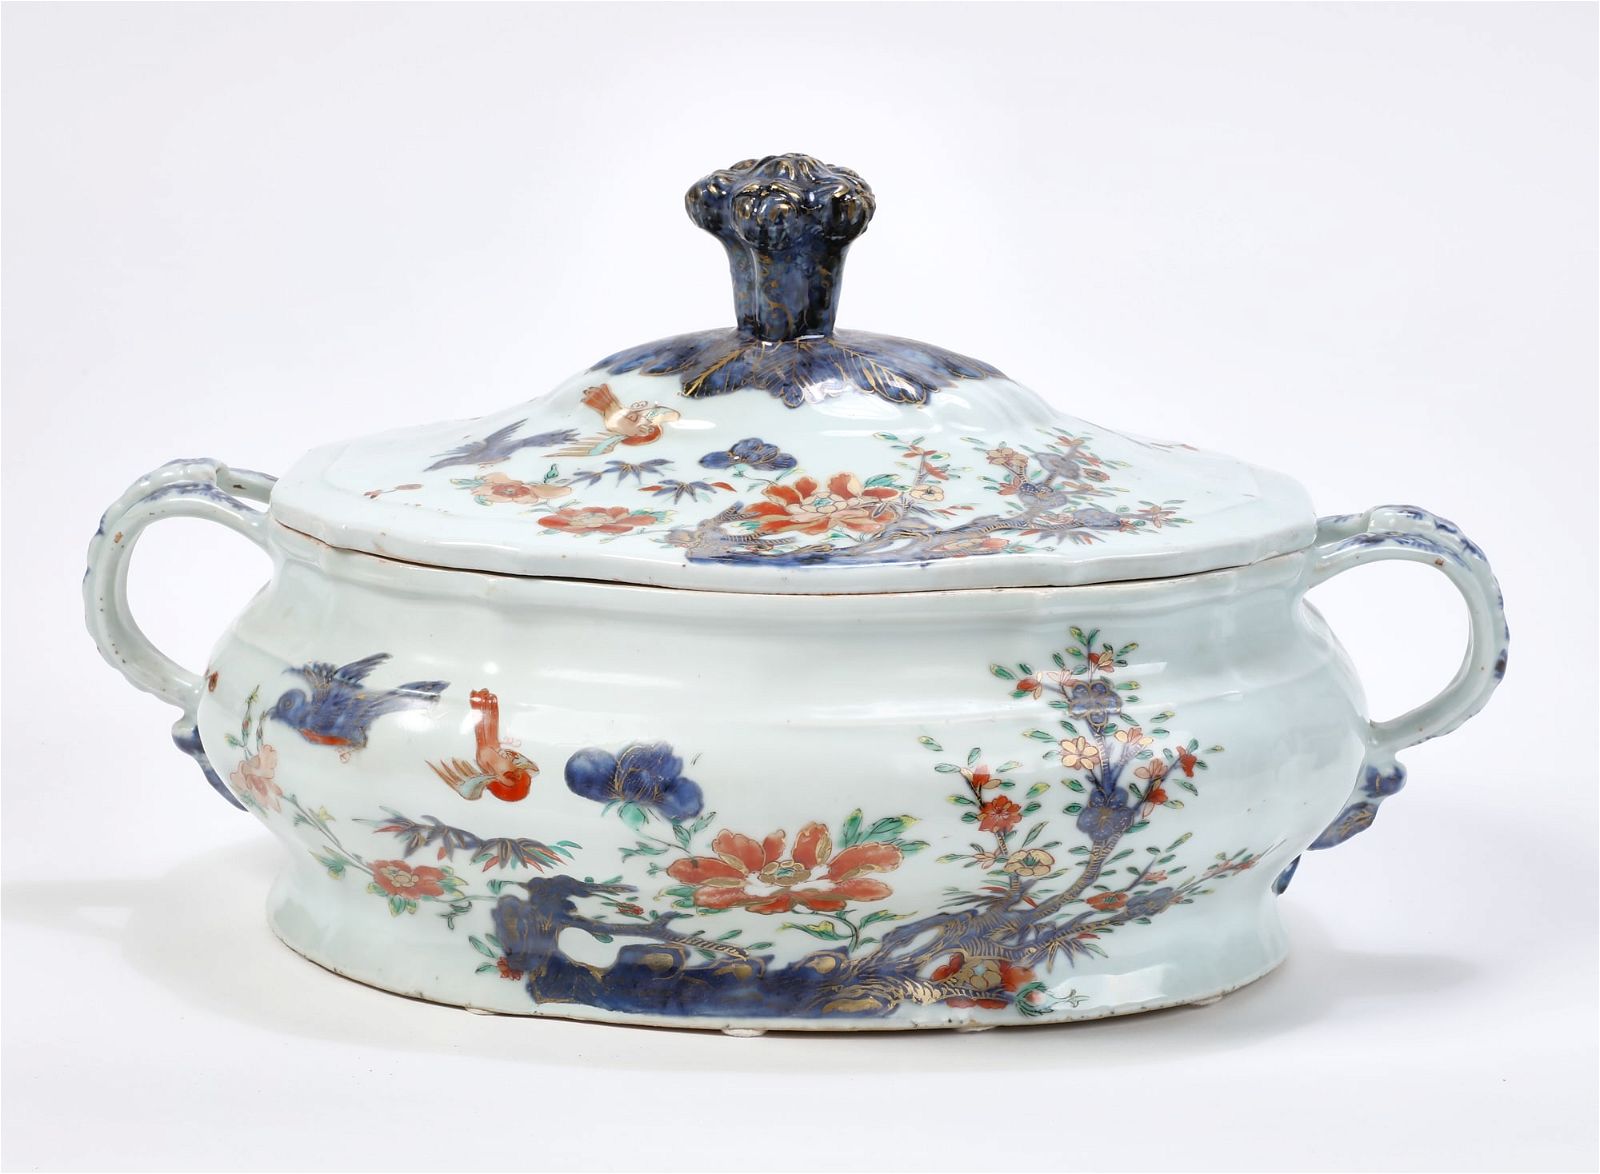 A CHINESE EXPORT PORCELAIN TOBACCO